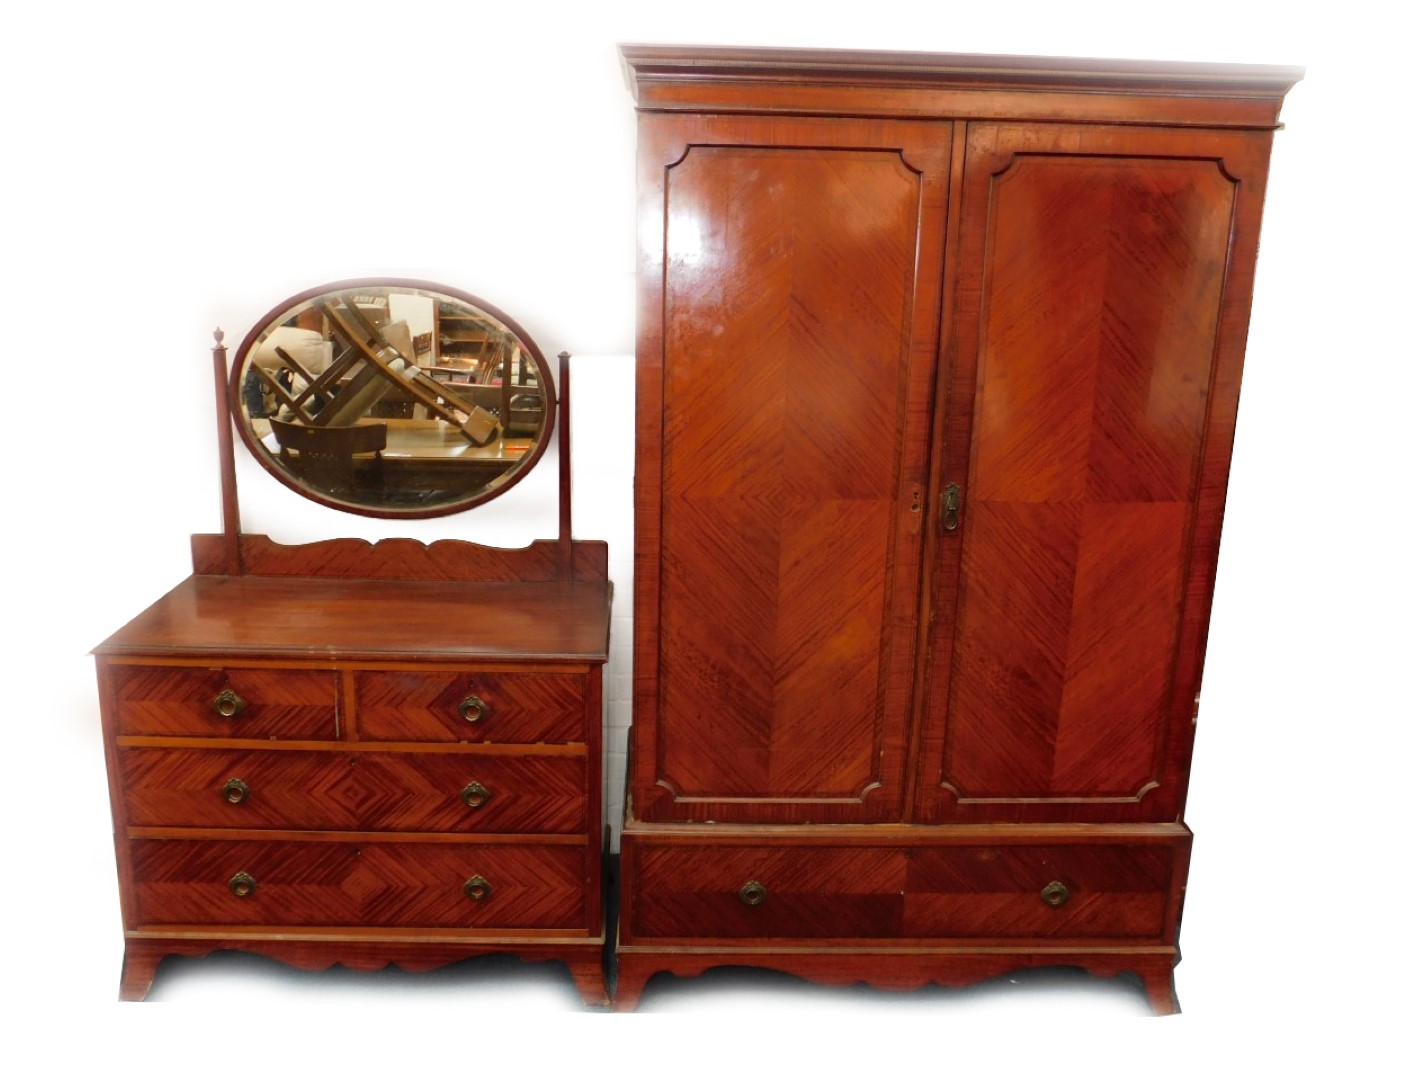 A Maple & Company mahogany double wardrobe, with quartered and herringbone veneers, the outswept